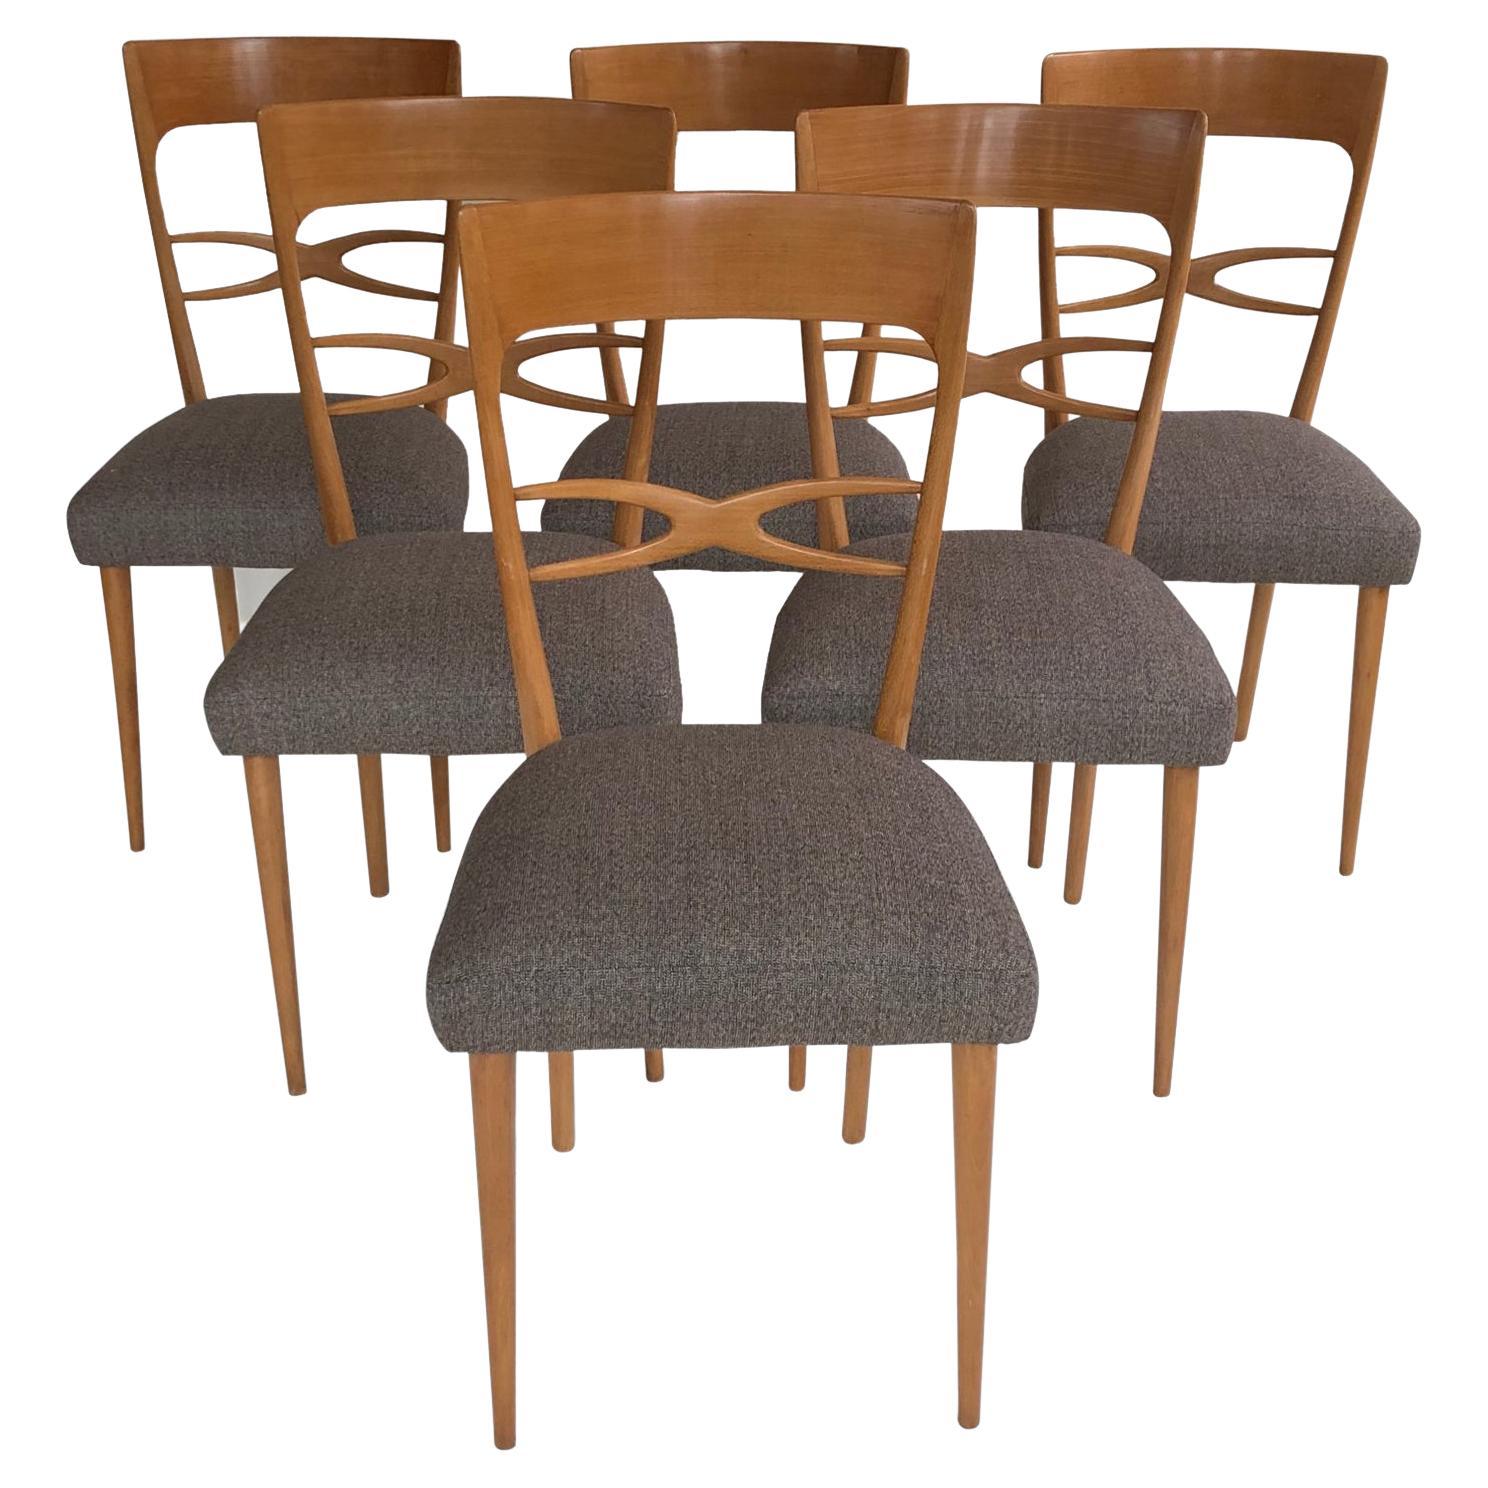 1950s dining chairs